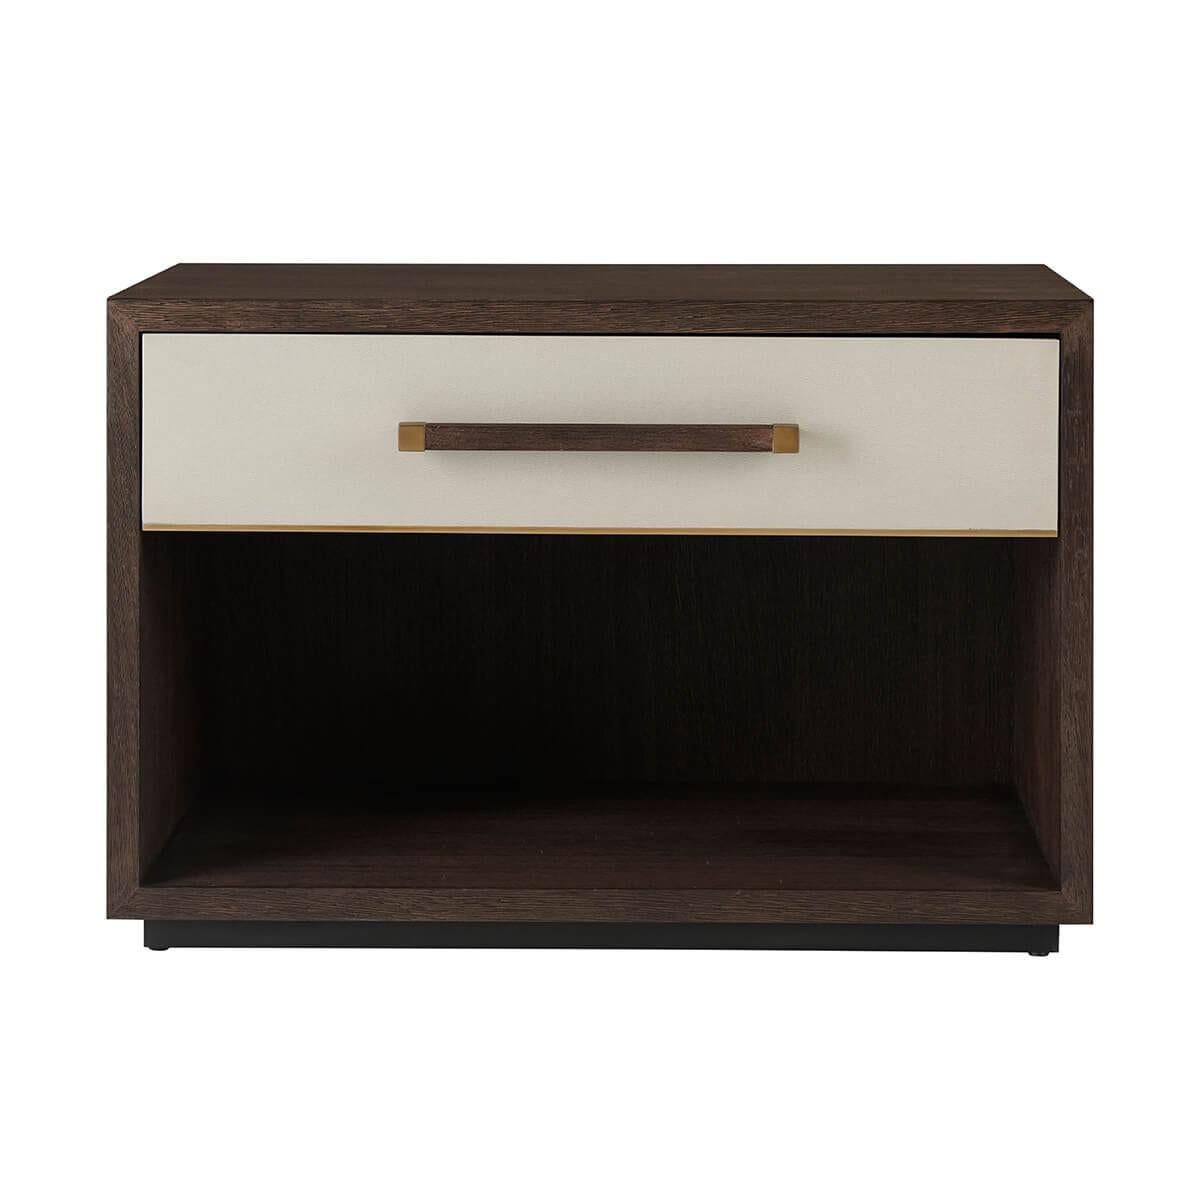 With a singular leather-wrapped soft closing drawer, a case finished in our dark Cardamon finish with a long modern handle with brushed brass details.

Dimensions: 30